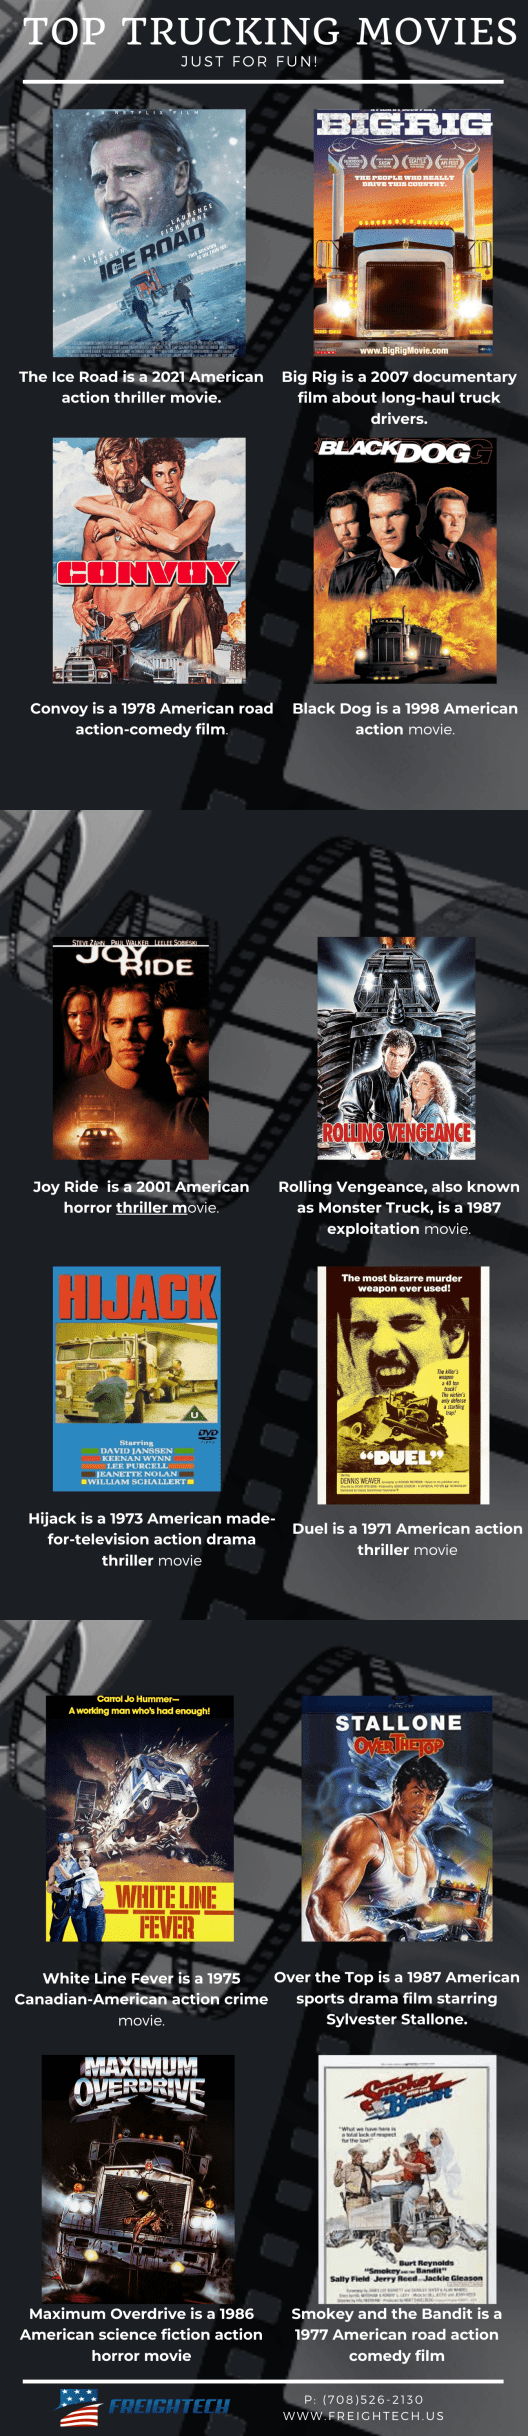 Best trucking movies infographic